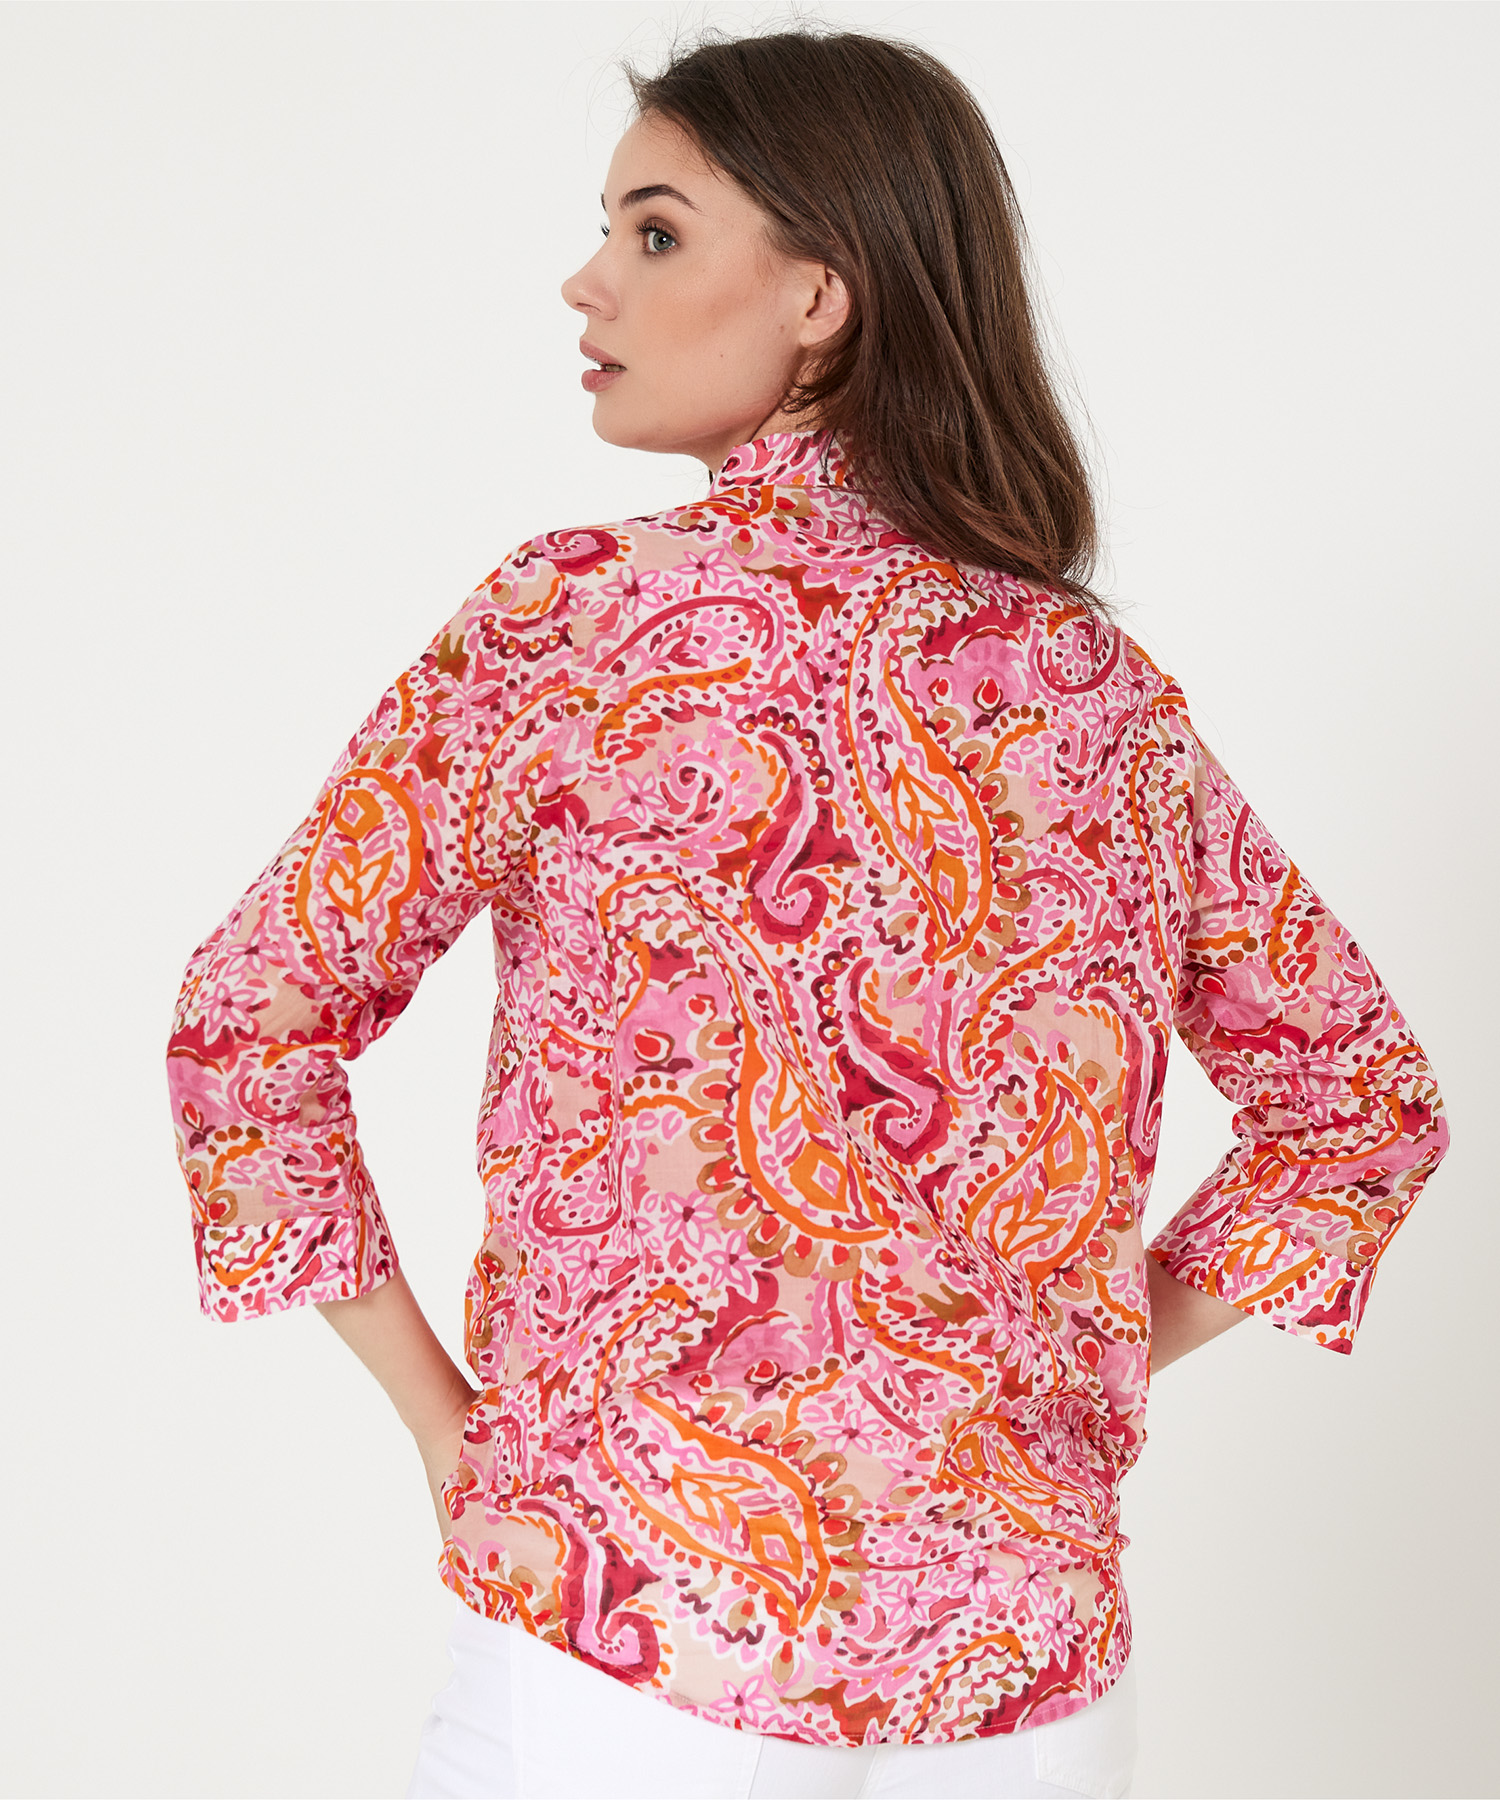 BeOne luchtige blouse paisley